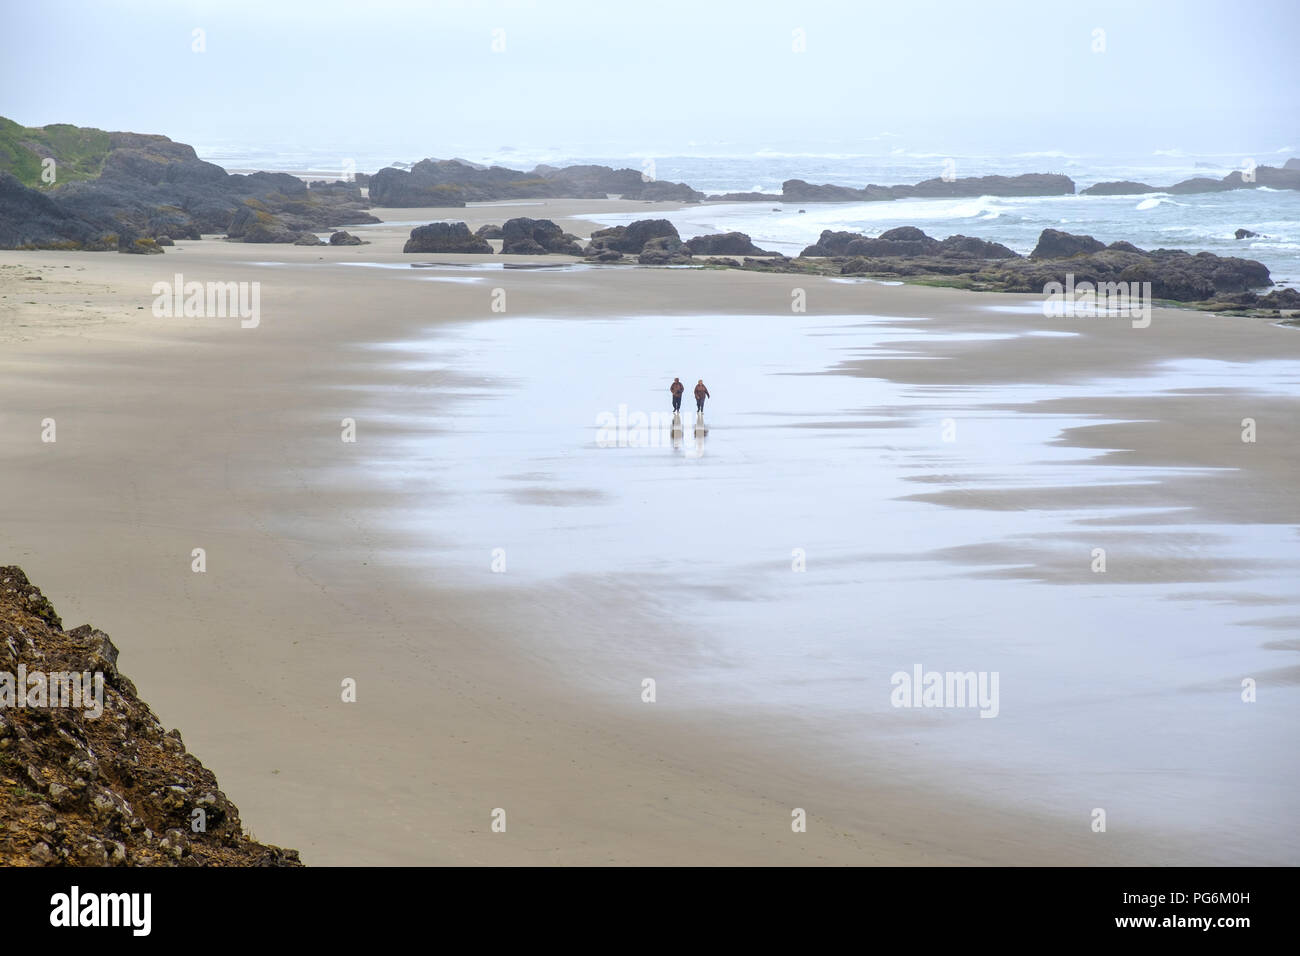 People walking on beach at Cape Perpetua scenic area, Oregon, USA Banque D'Images